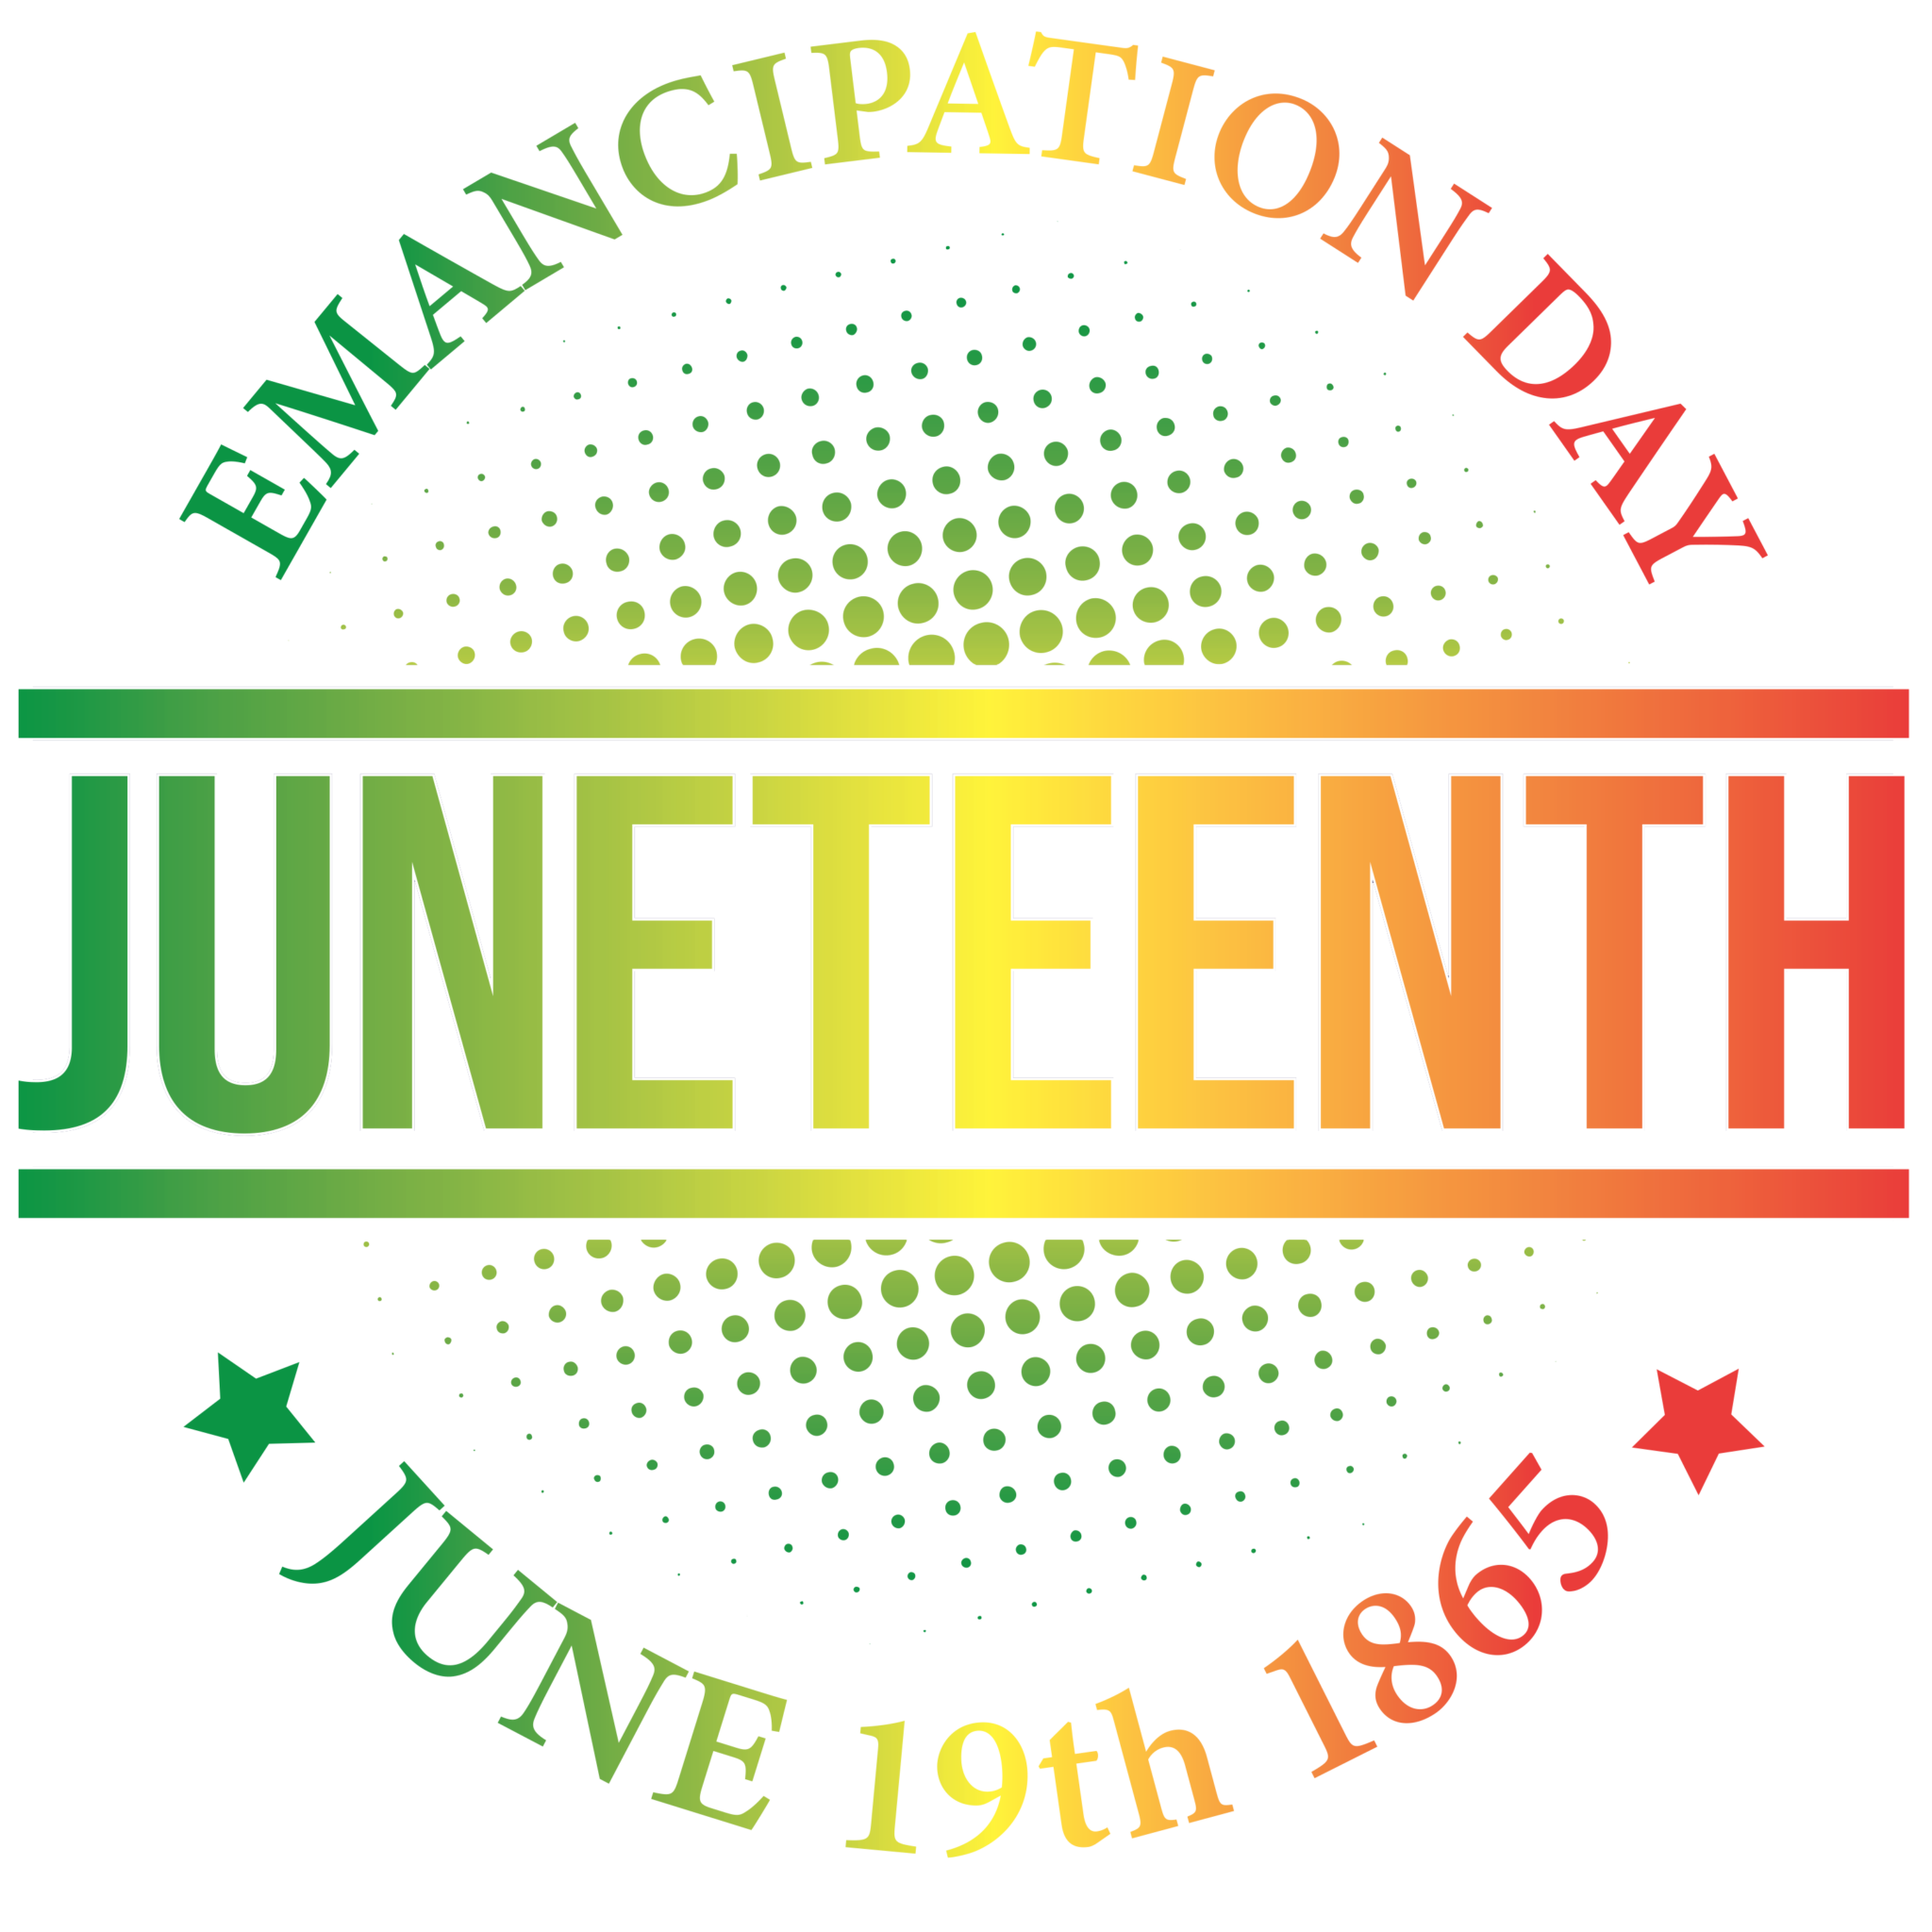 Juneteenth logo including the text emancipation day June 19th 1865